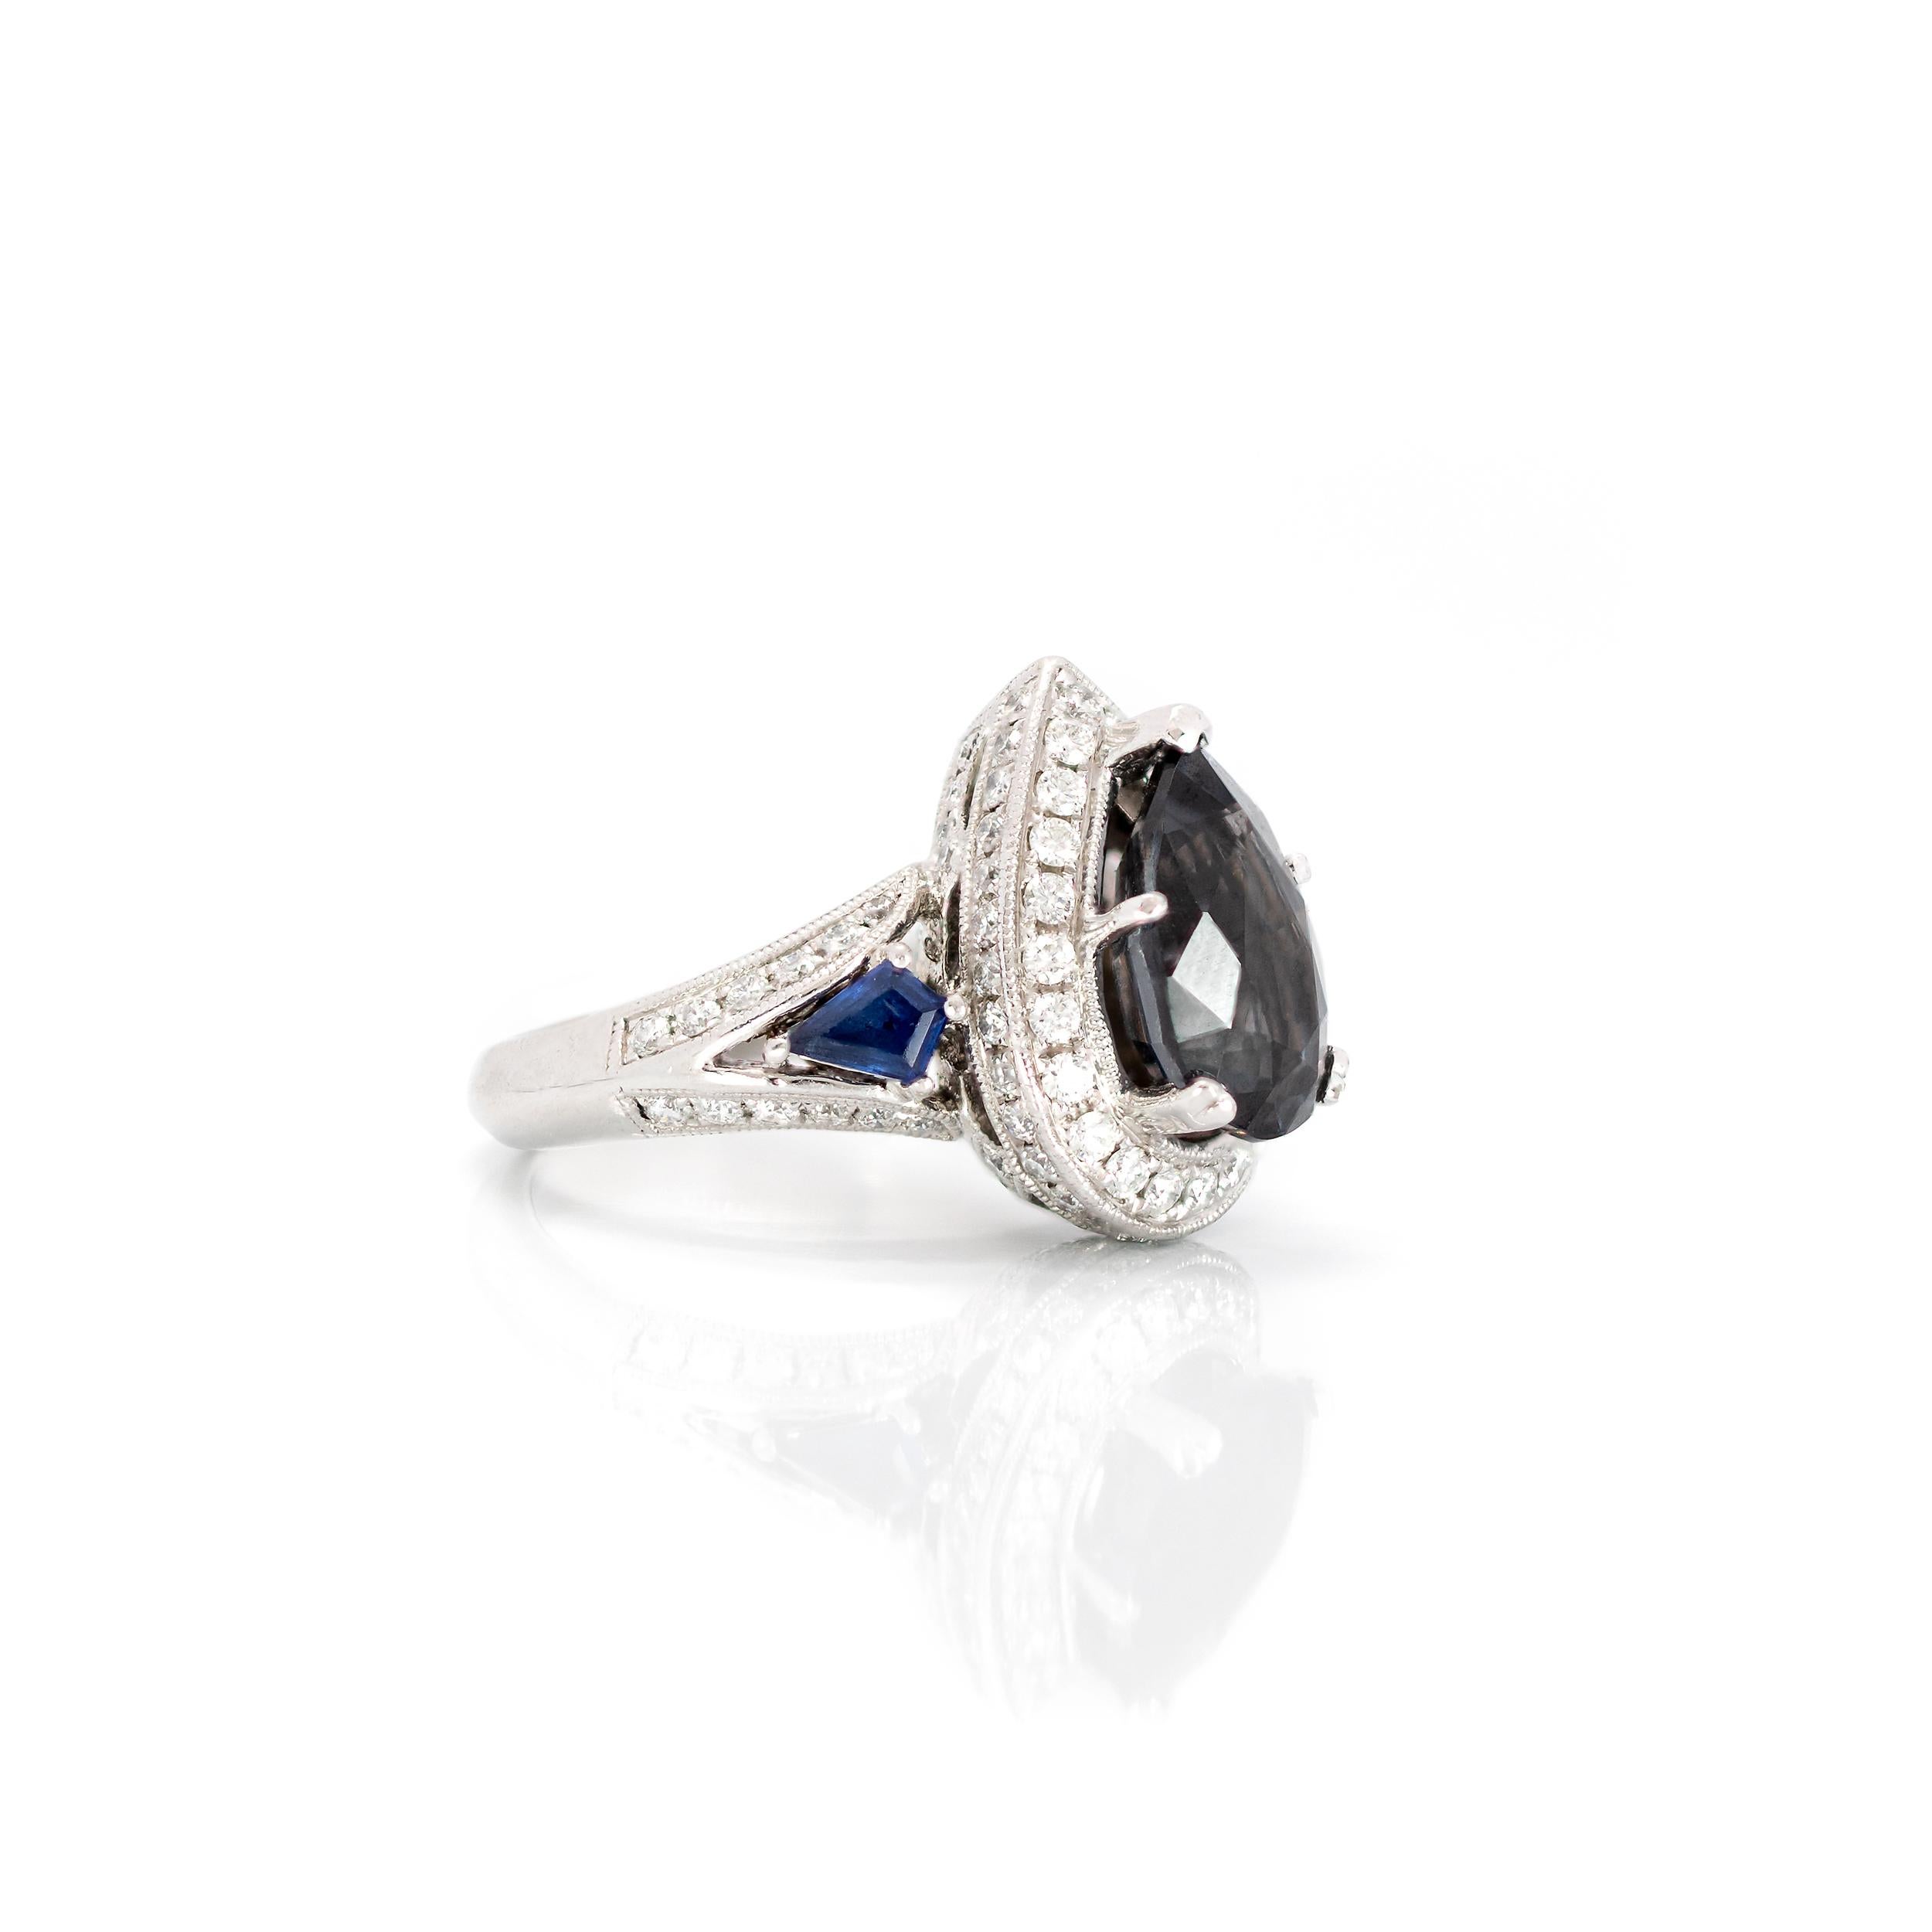 Such a beautifully designed ring with a sophisticated Pear-shaped Lavender Spinel surrounded by Diamonds, including an intricate profile design to ensure a beautiful look at every possible angle.  The Kite-shaped diamonds running from the Spinel